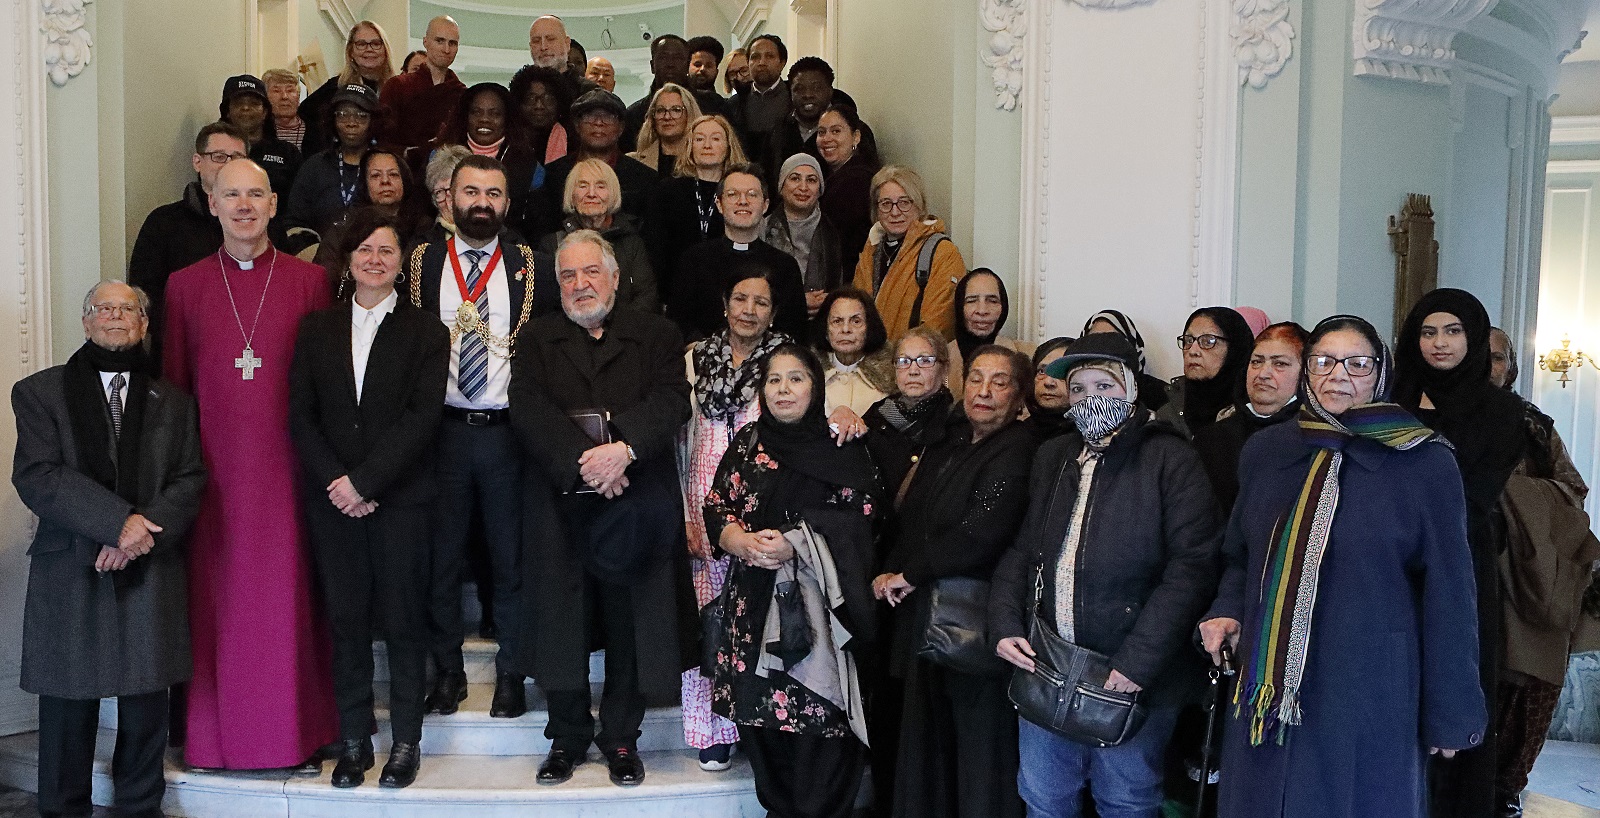 Mayor of Lambeth, Councillrs and representatives of the 5 most widely practiced faiths in Lambeth on the Town Hall stairs